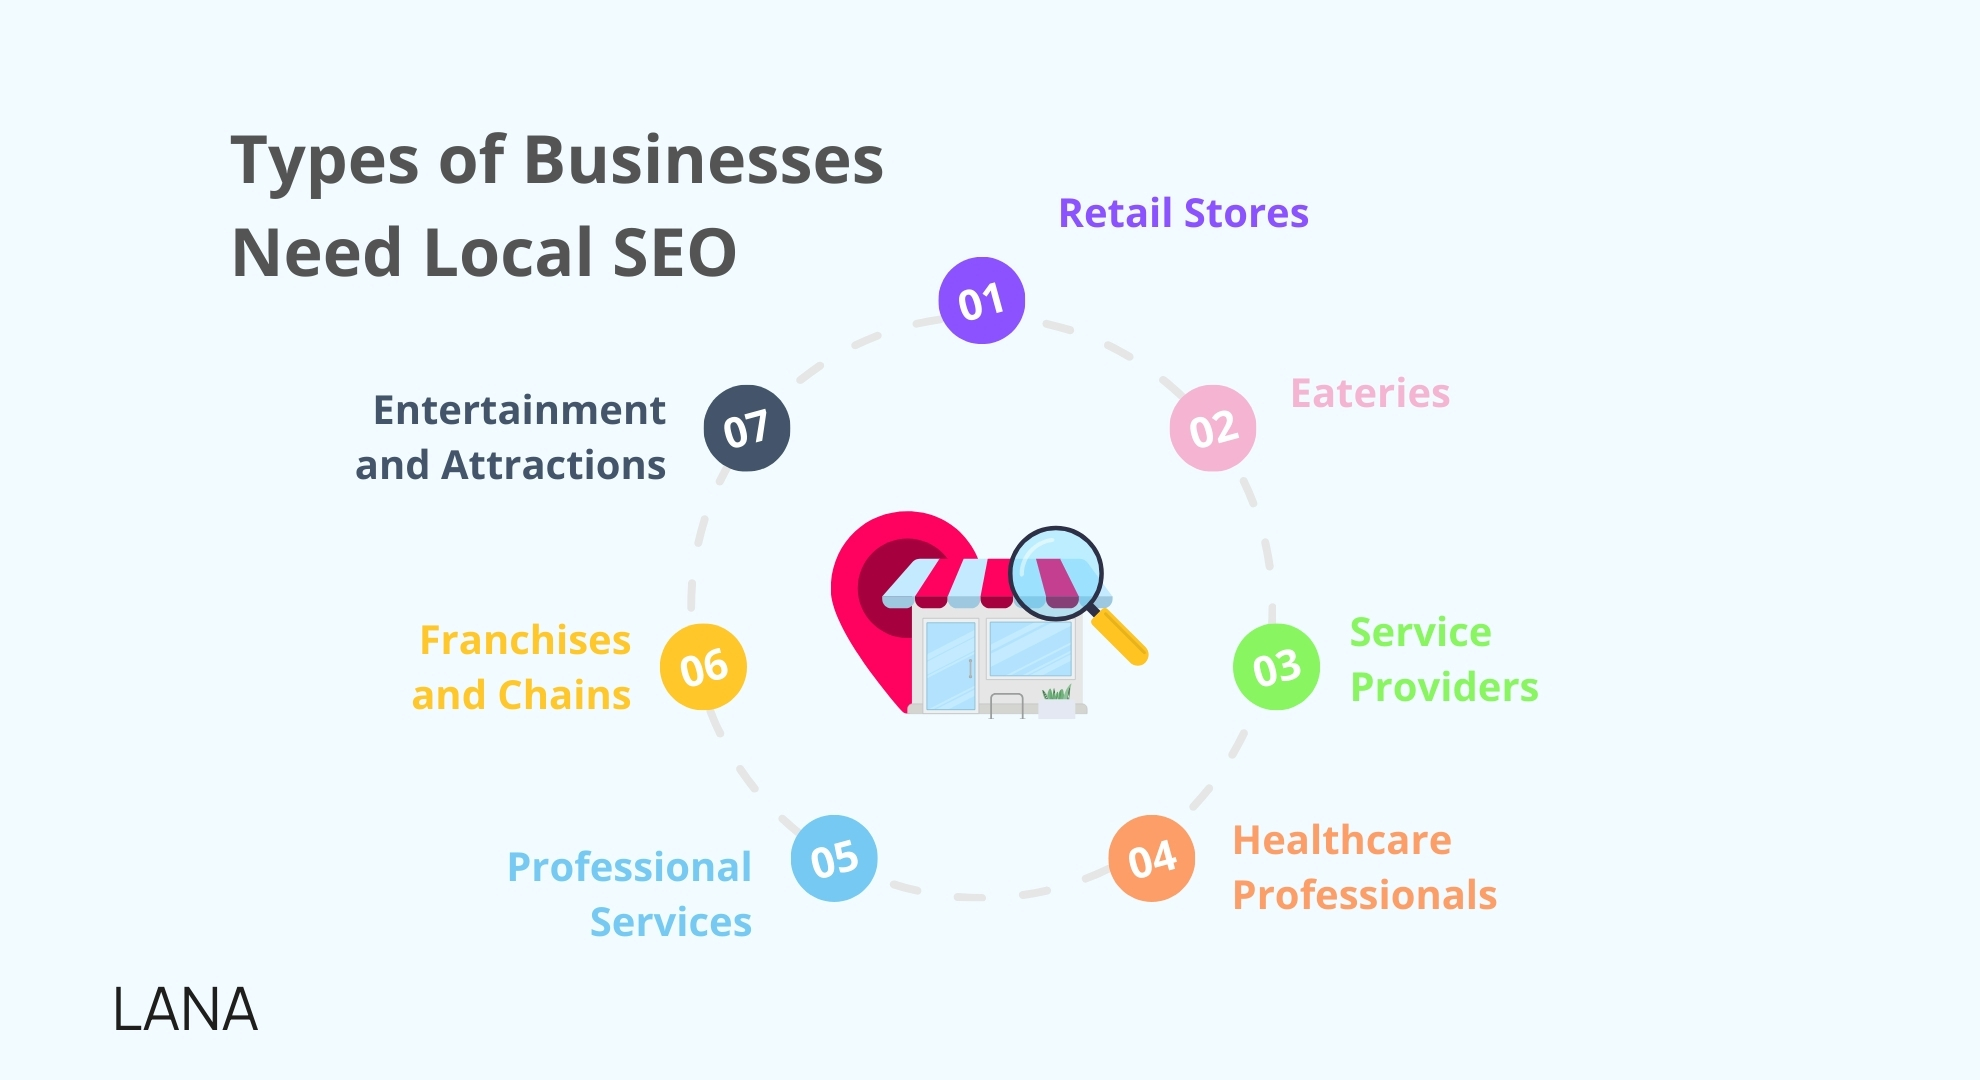 What Types of Businesses Need Local SEO?